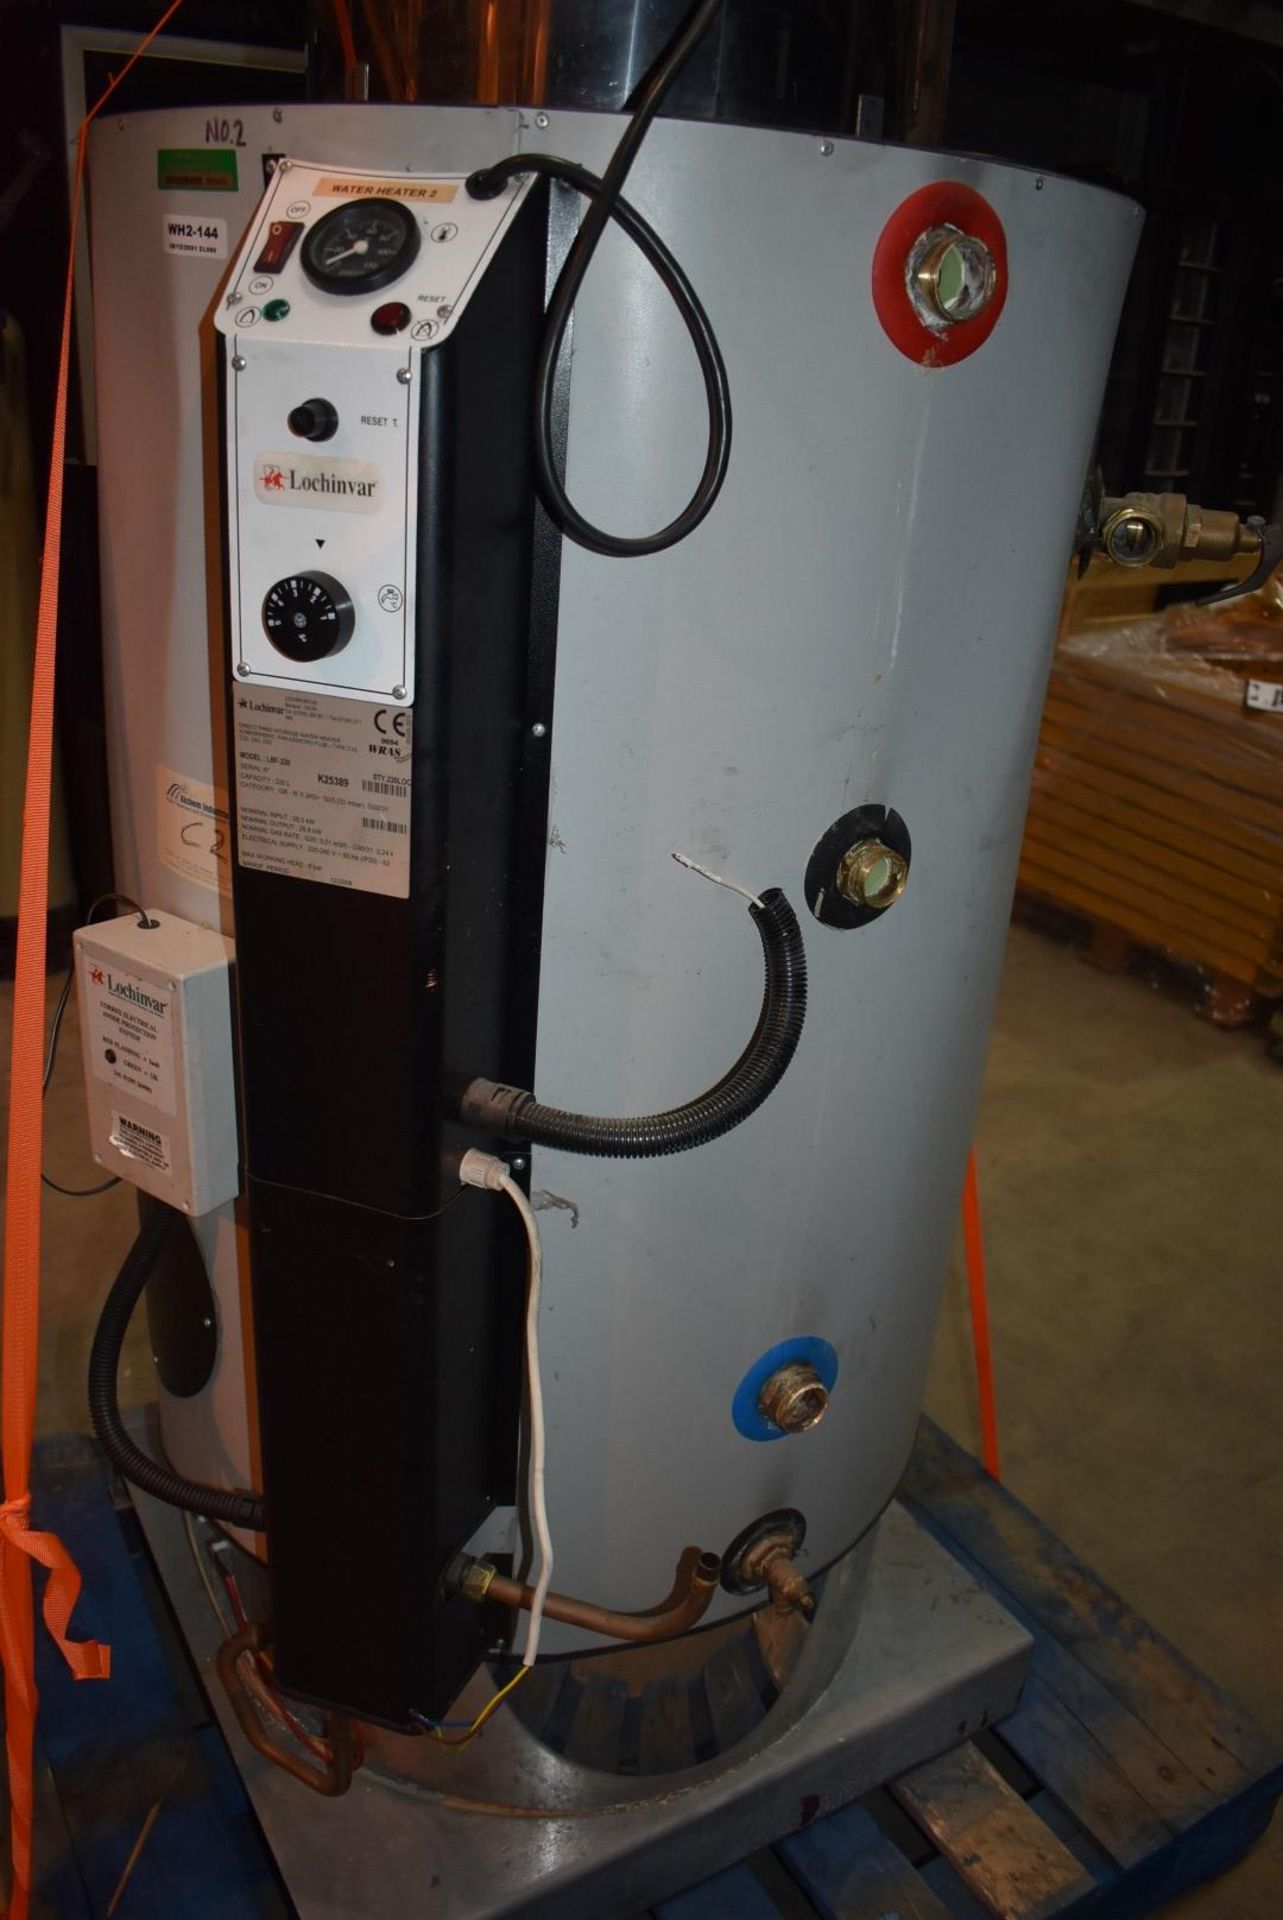 1 x Lochinvar High Efficiency Gas Fired 220L Storage Water Heater - Model LBF-220 - Ref: WH2-144 H5D - Image 11 of 19